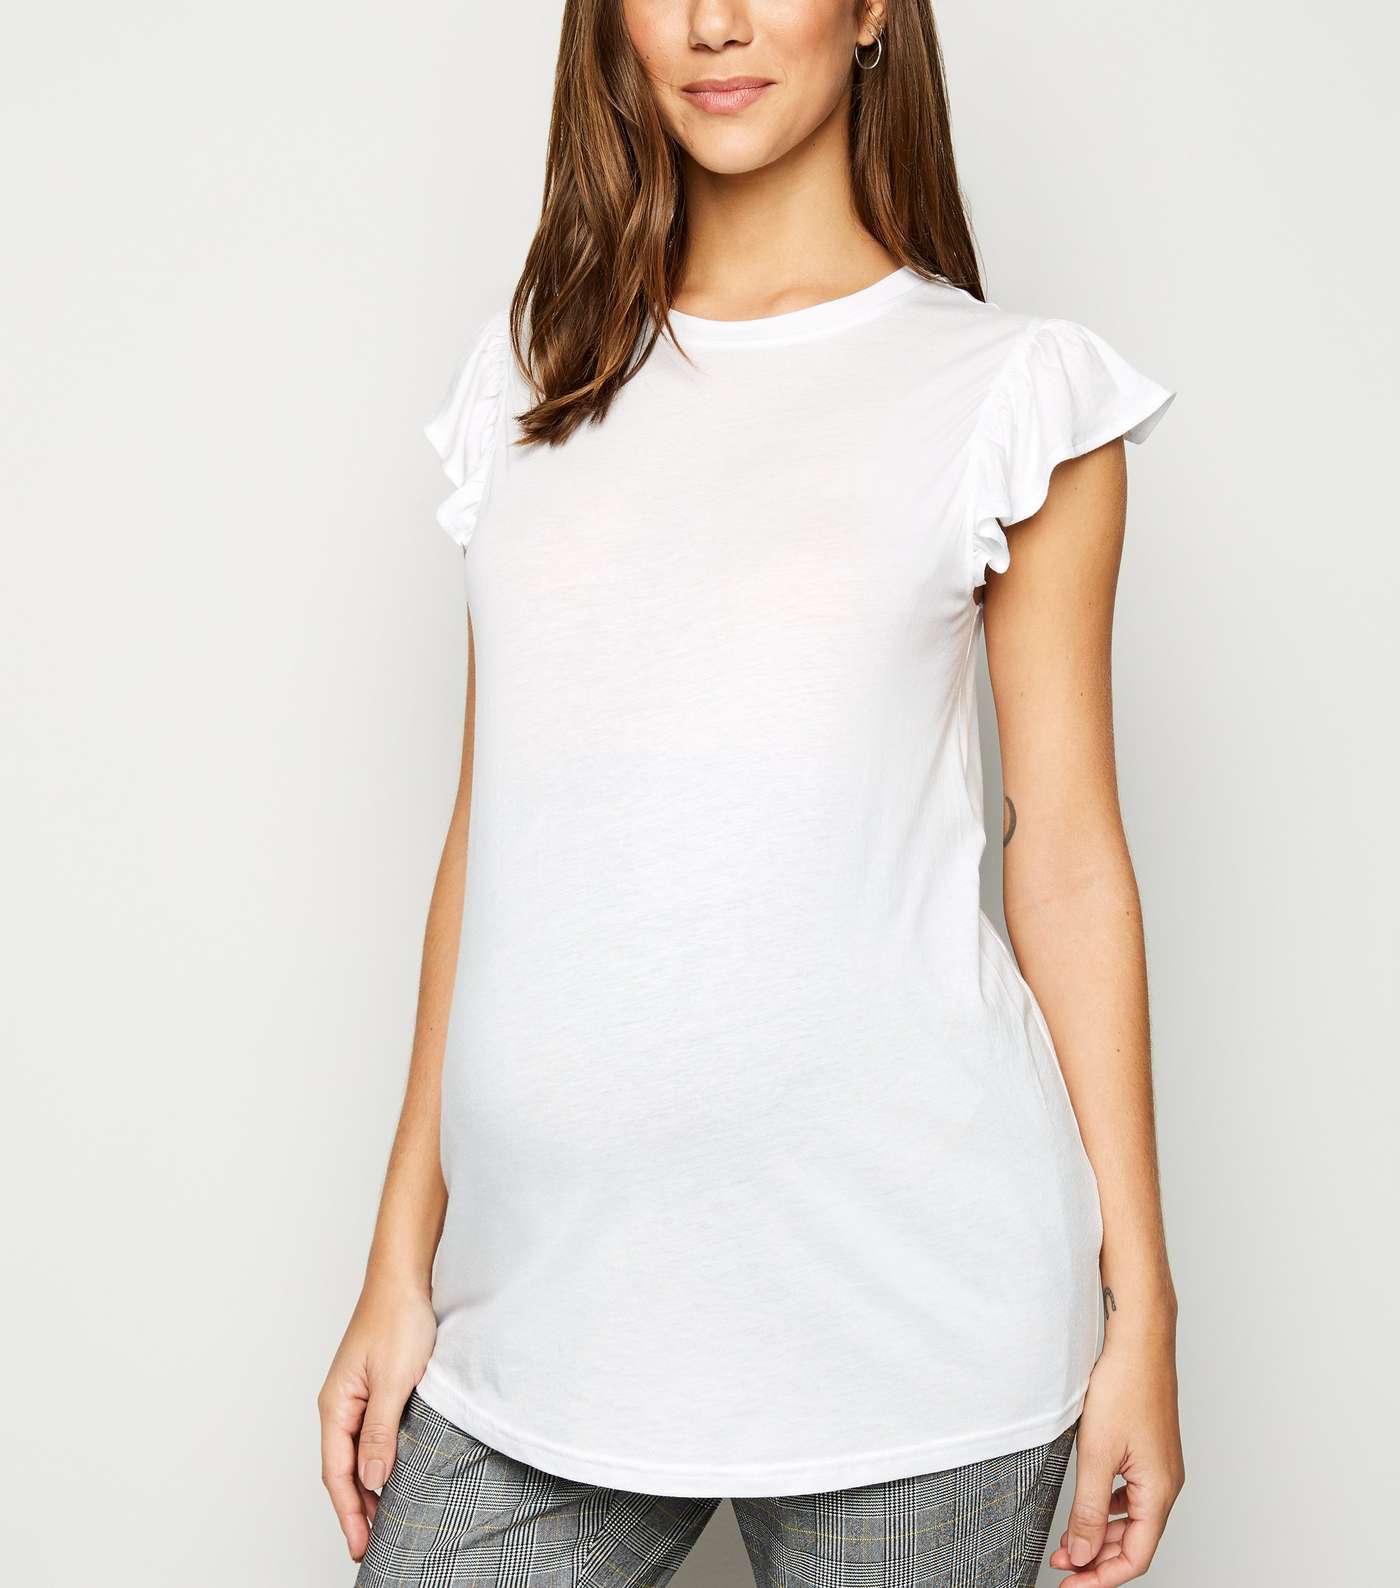 Maternity White Frill Sleeve Top